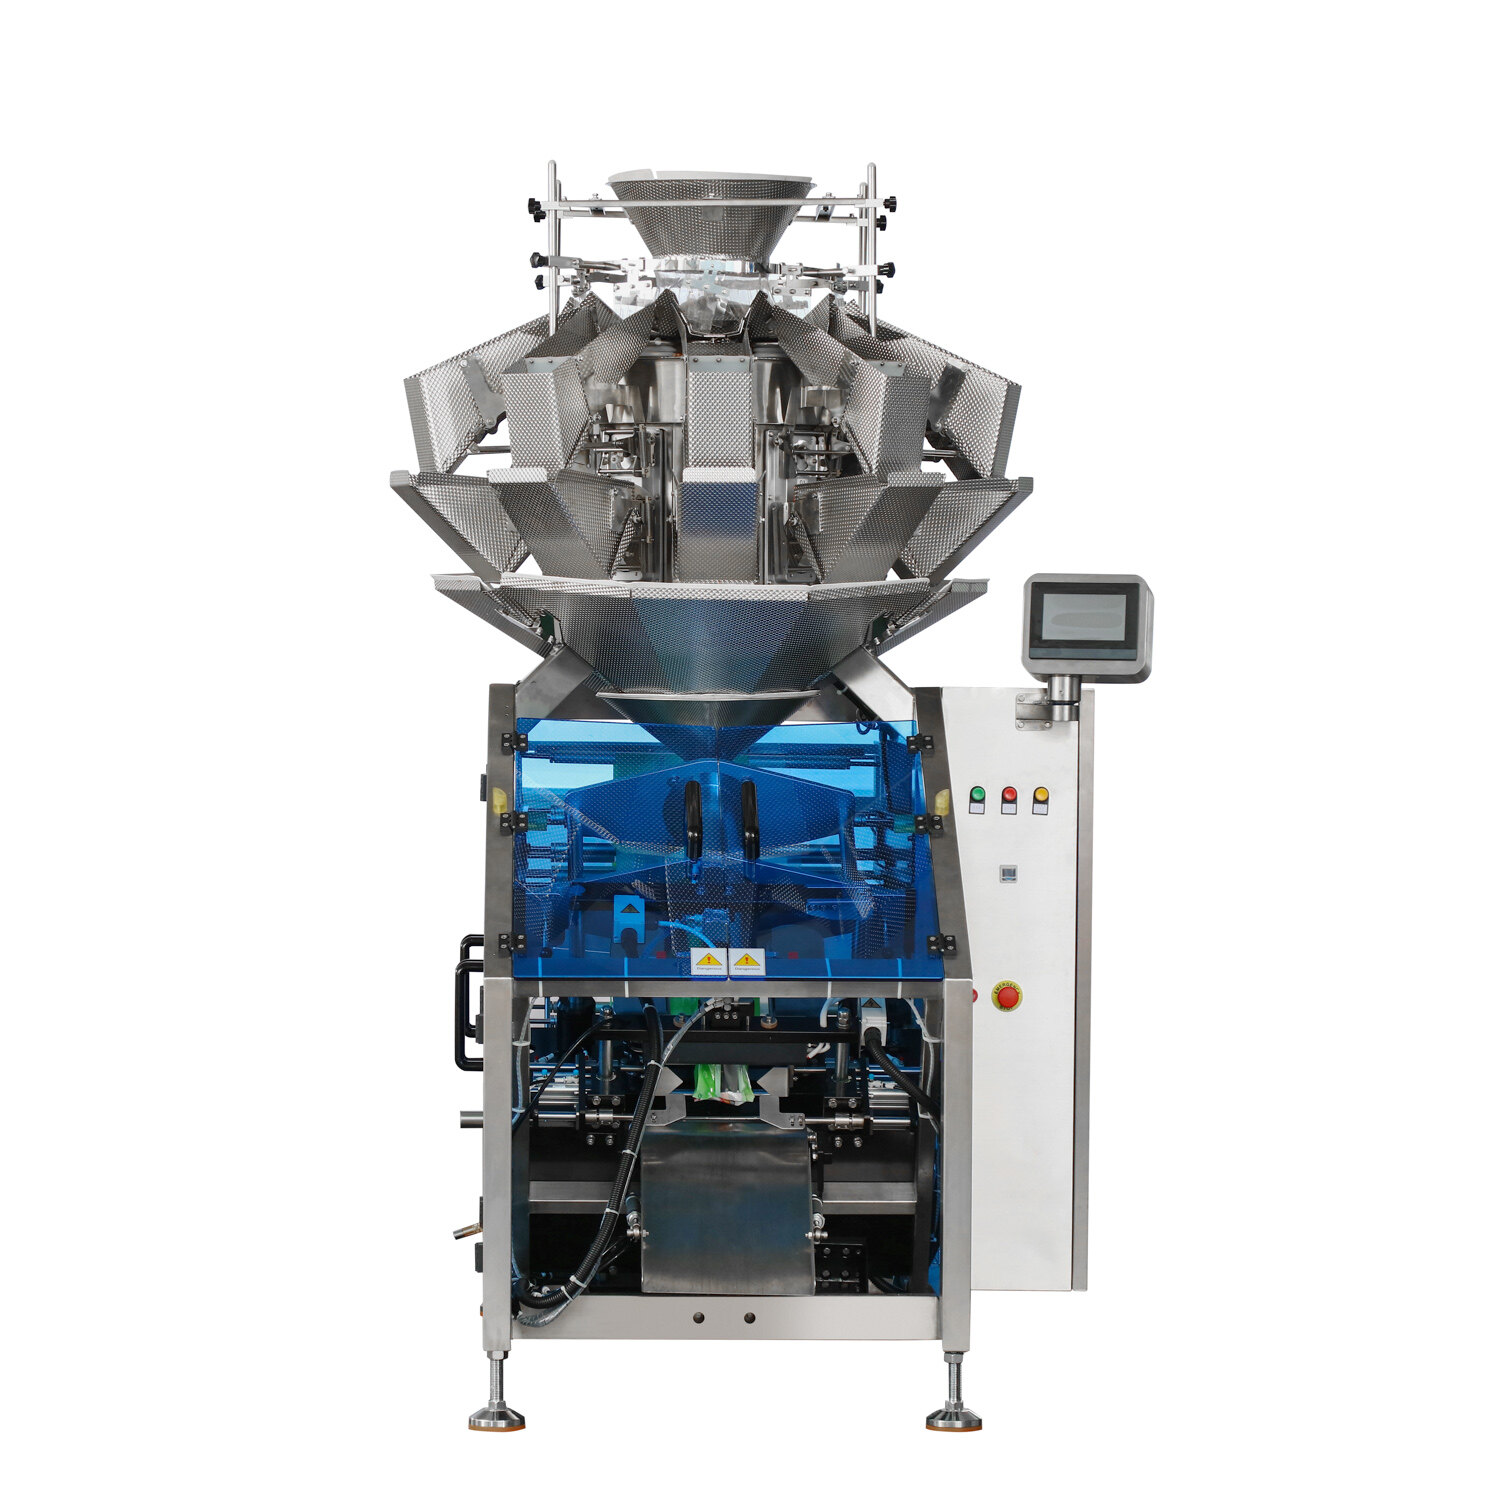 multihead weigher packing machine factory, multihead weigher packing machine manufacturers, multi head weigher packing machine